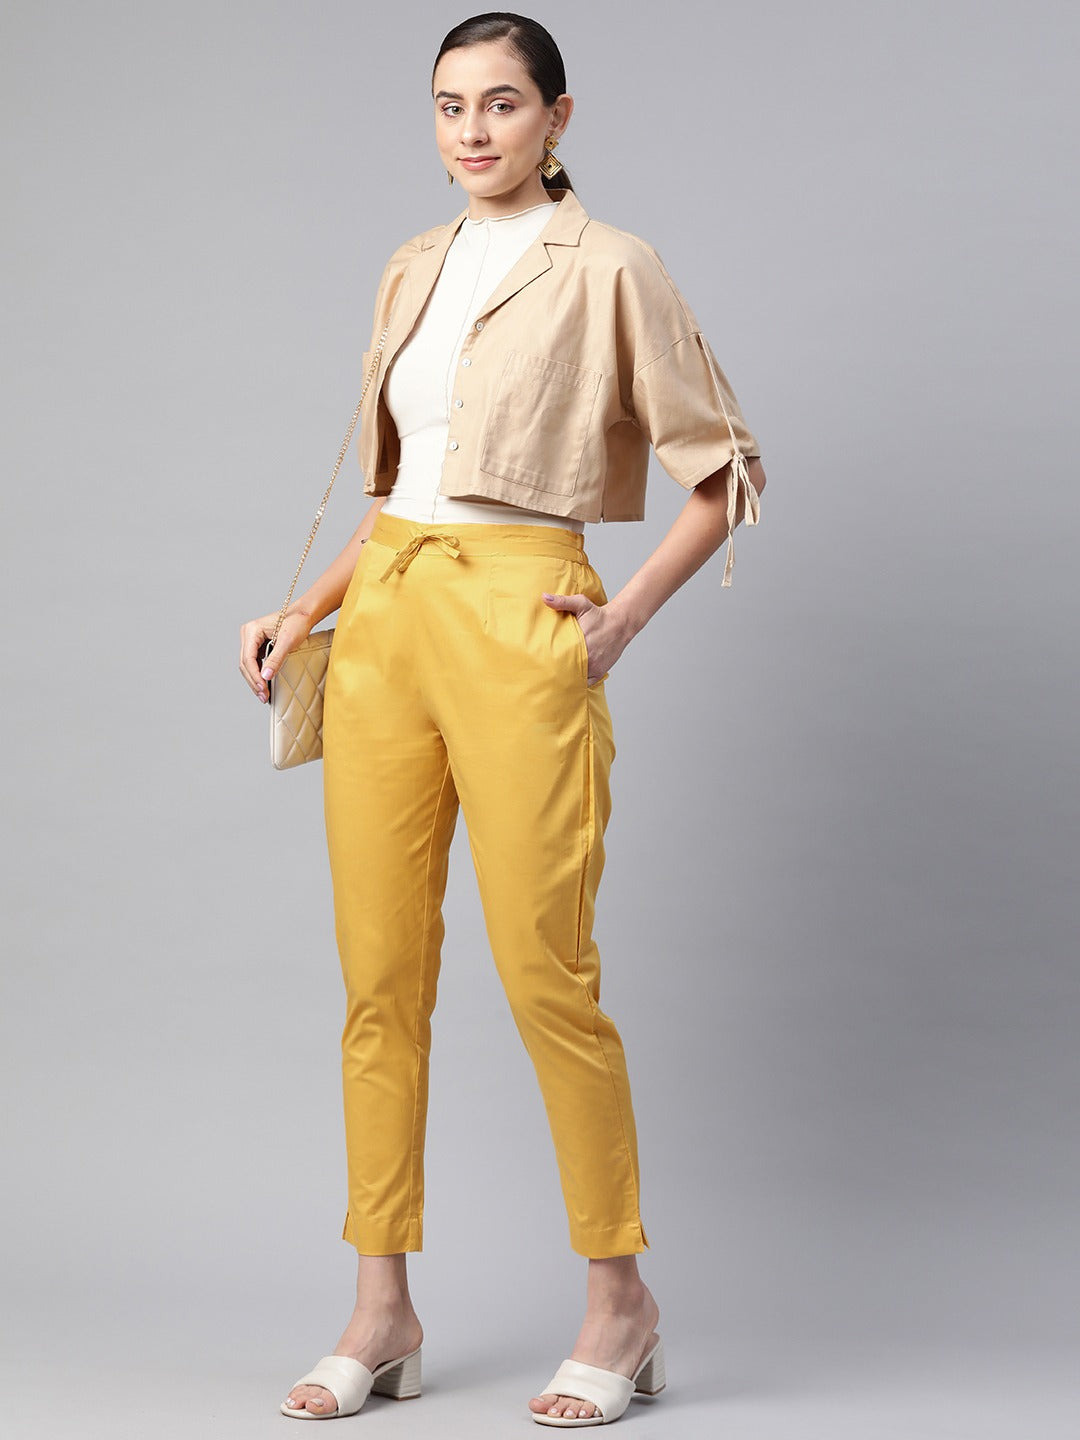 High-rise paper bag trousers